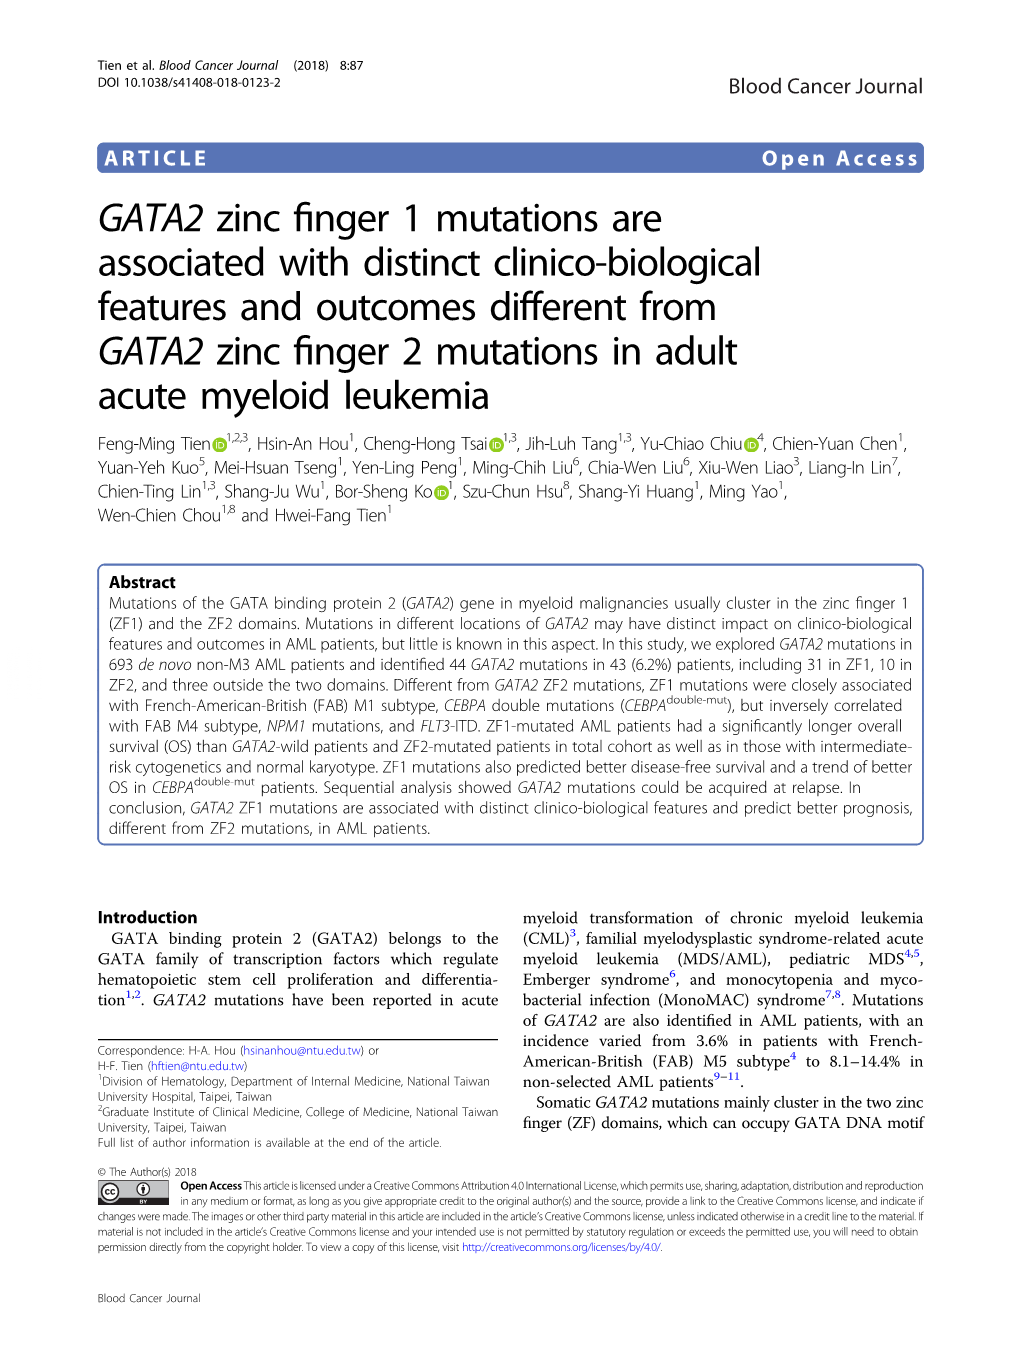 GATA2 Zinc Finger 1 Mutations Are Associated with Distinct Clinico-Biological Features and Outcomes Different from GATA2 Zinc Fi